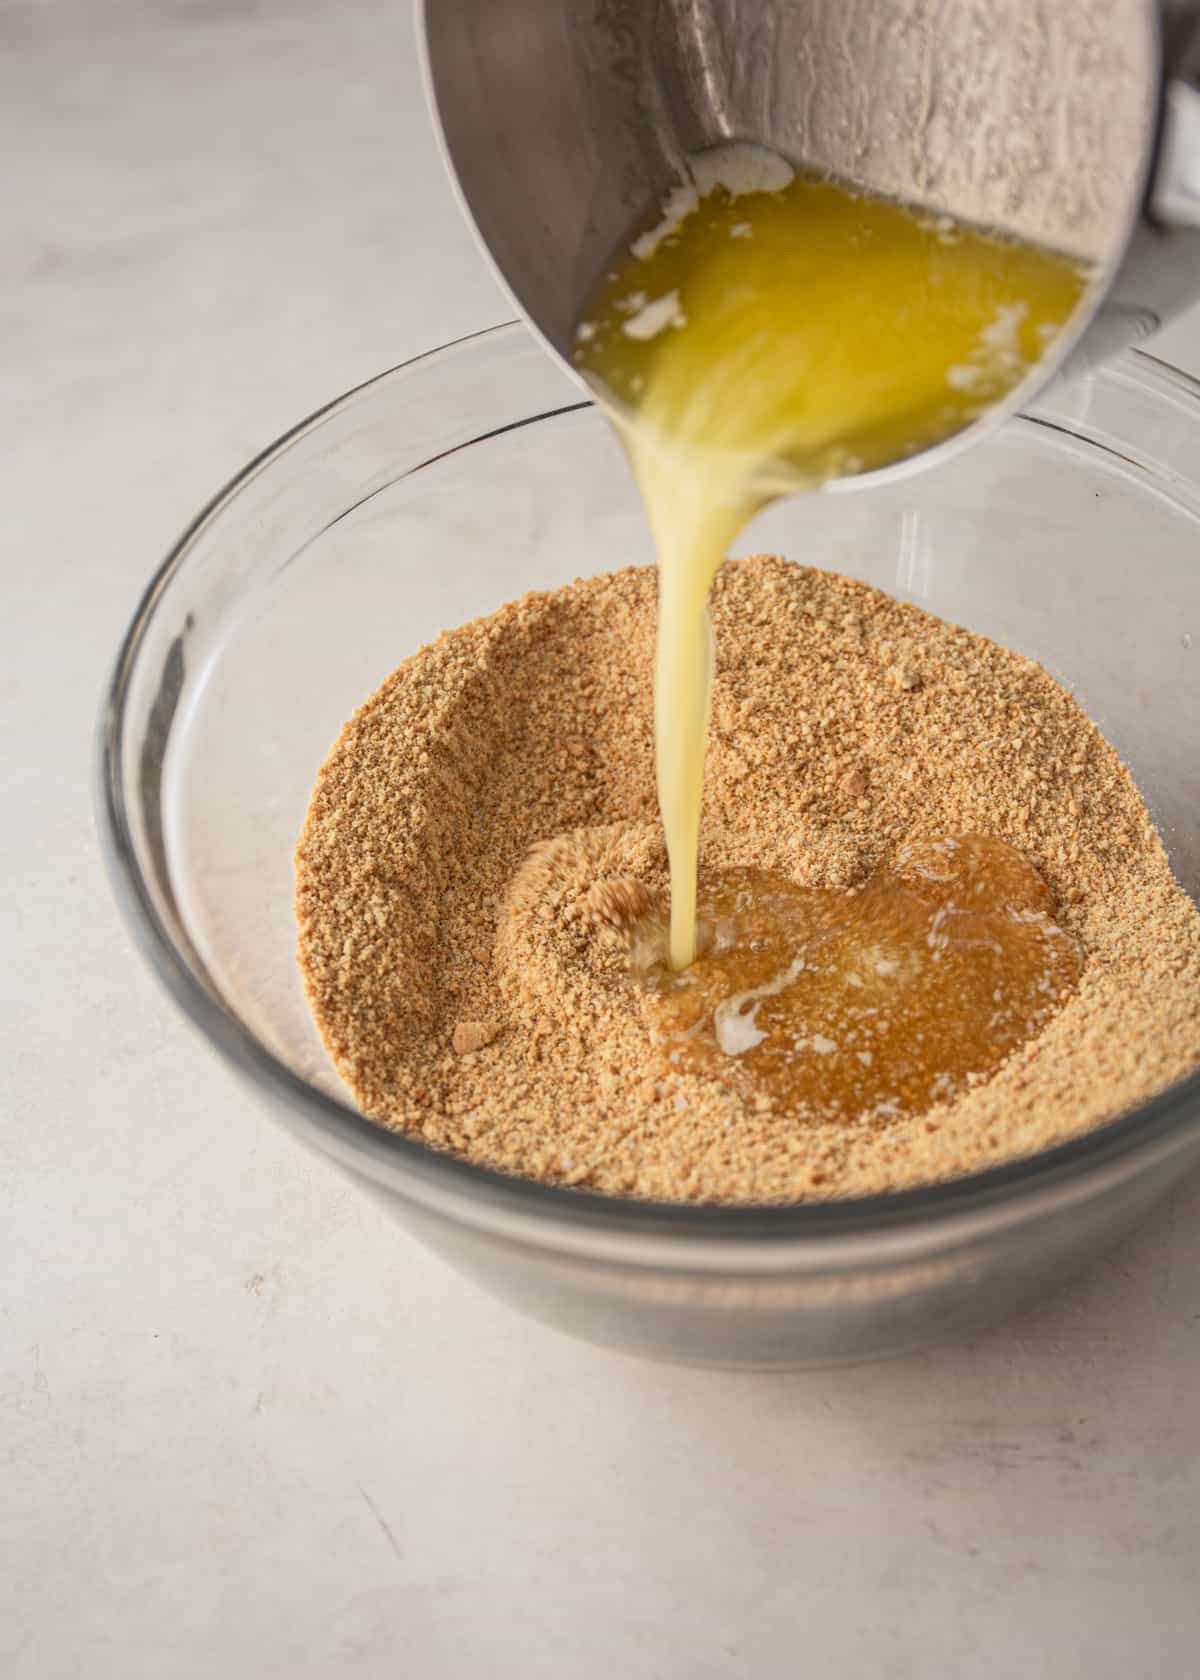 pouring melted butter into graham cracker crumbs in a clear glass bowl